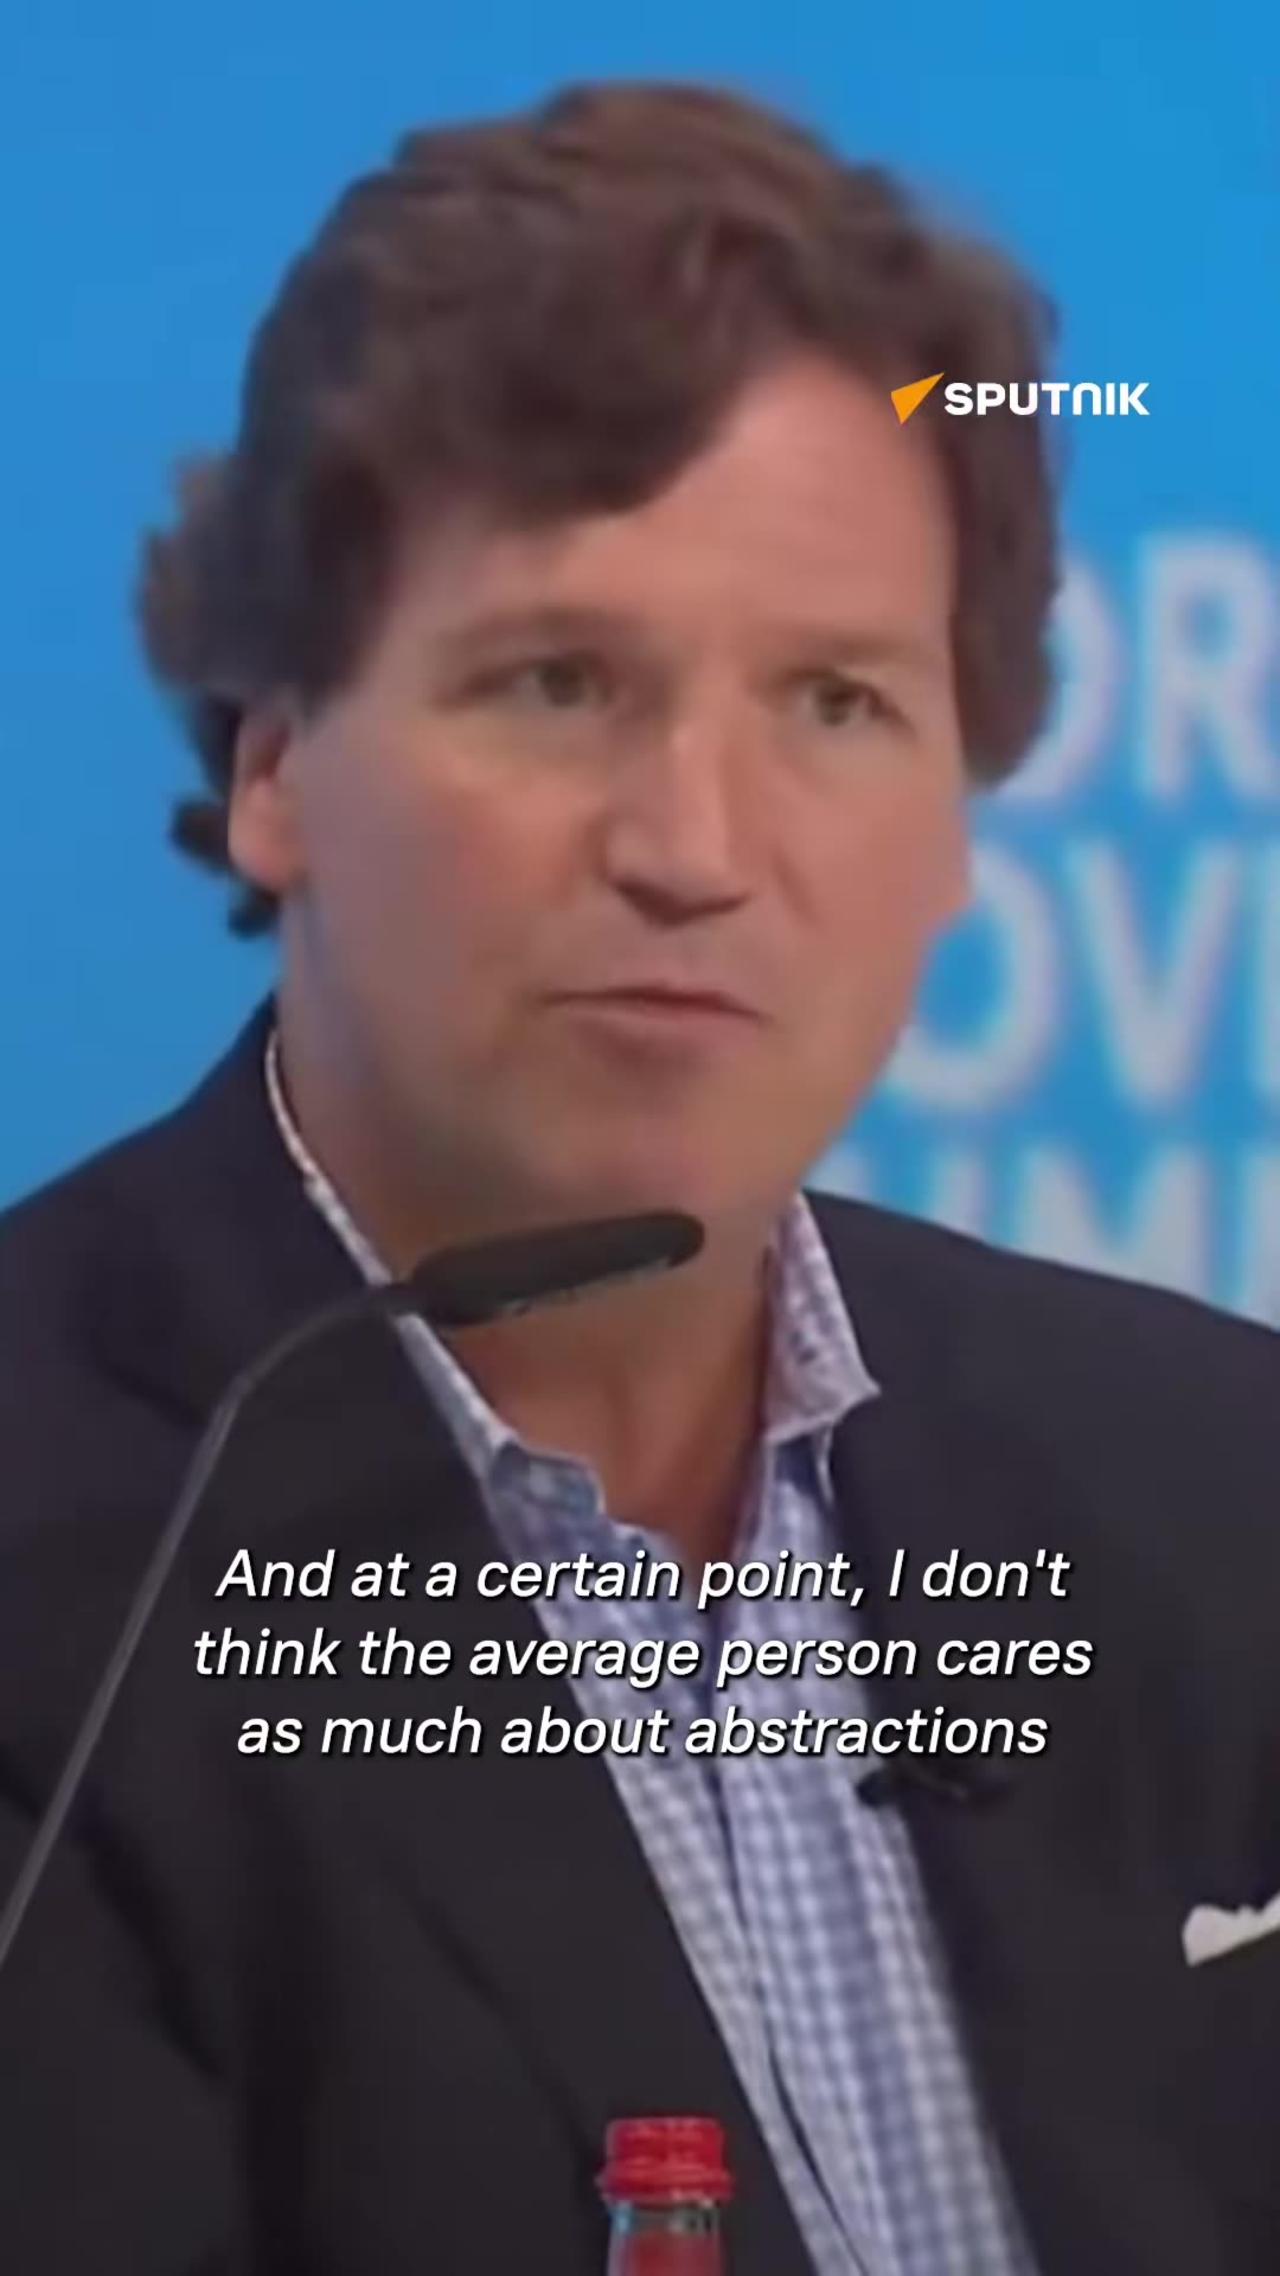 US journalist Tucker Carlson reflects on his visit to Russia